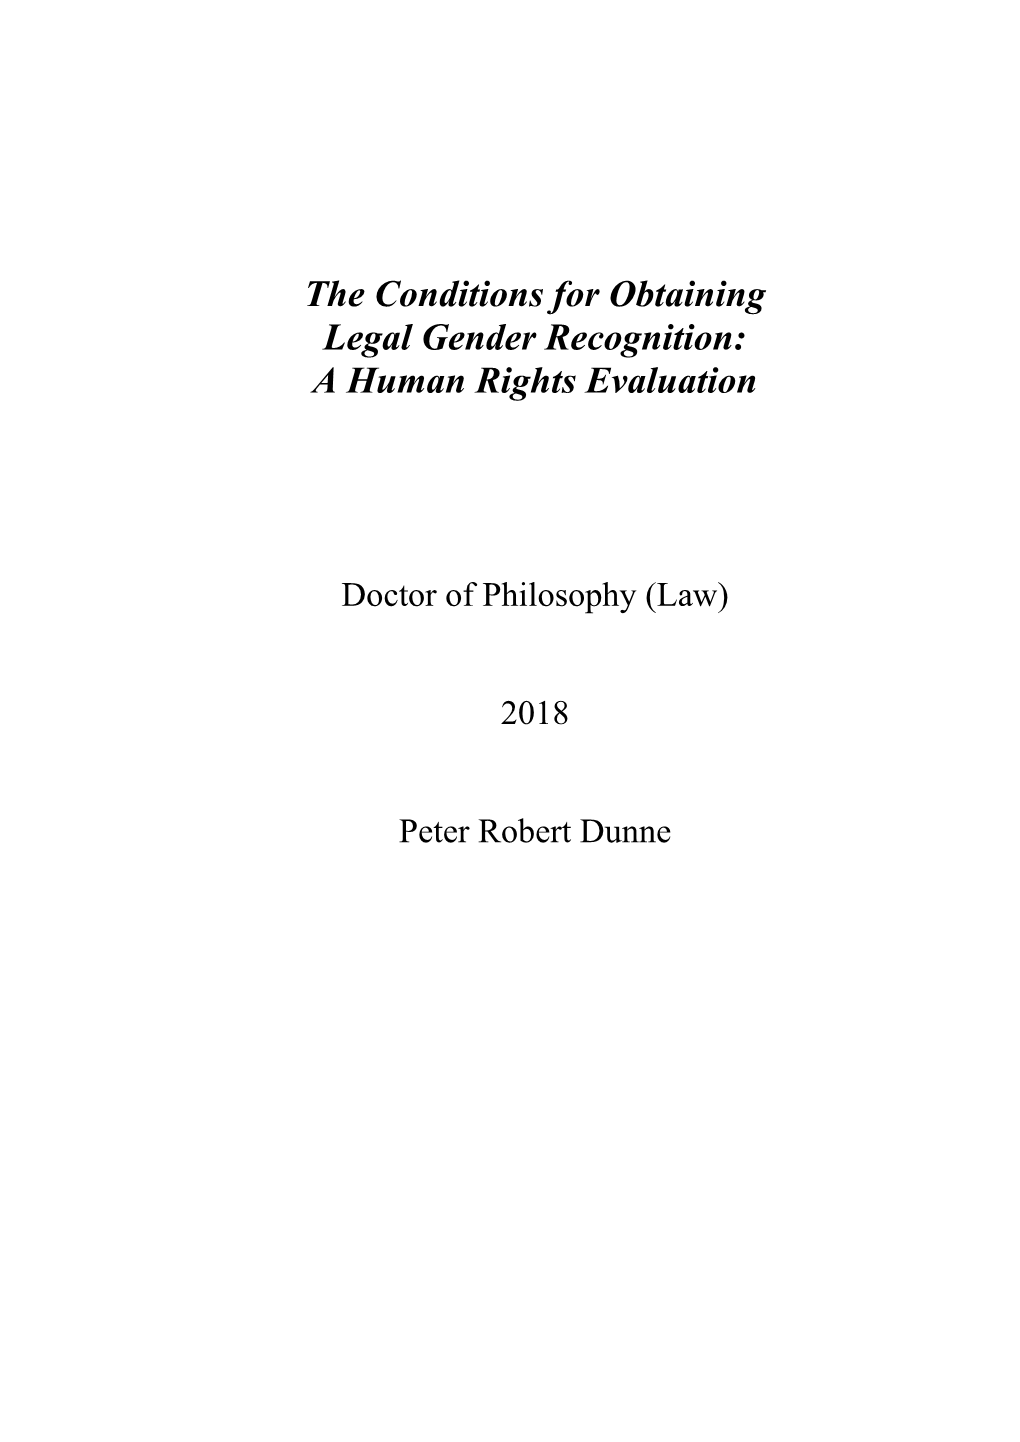 The Conditions for Obtaining Legal Gender Recognition: a Human Rights Evaluation